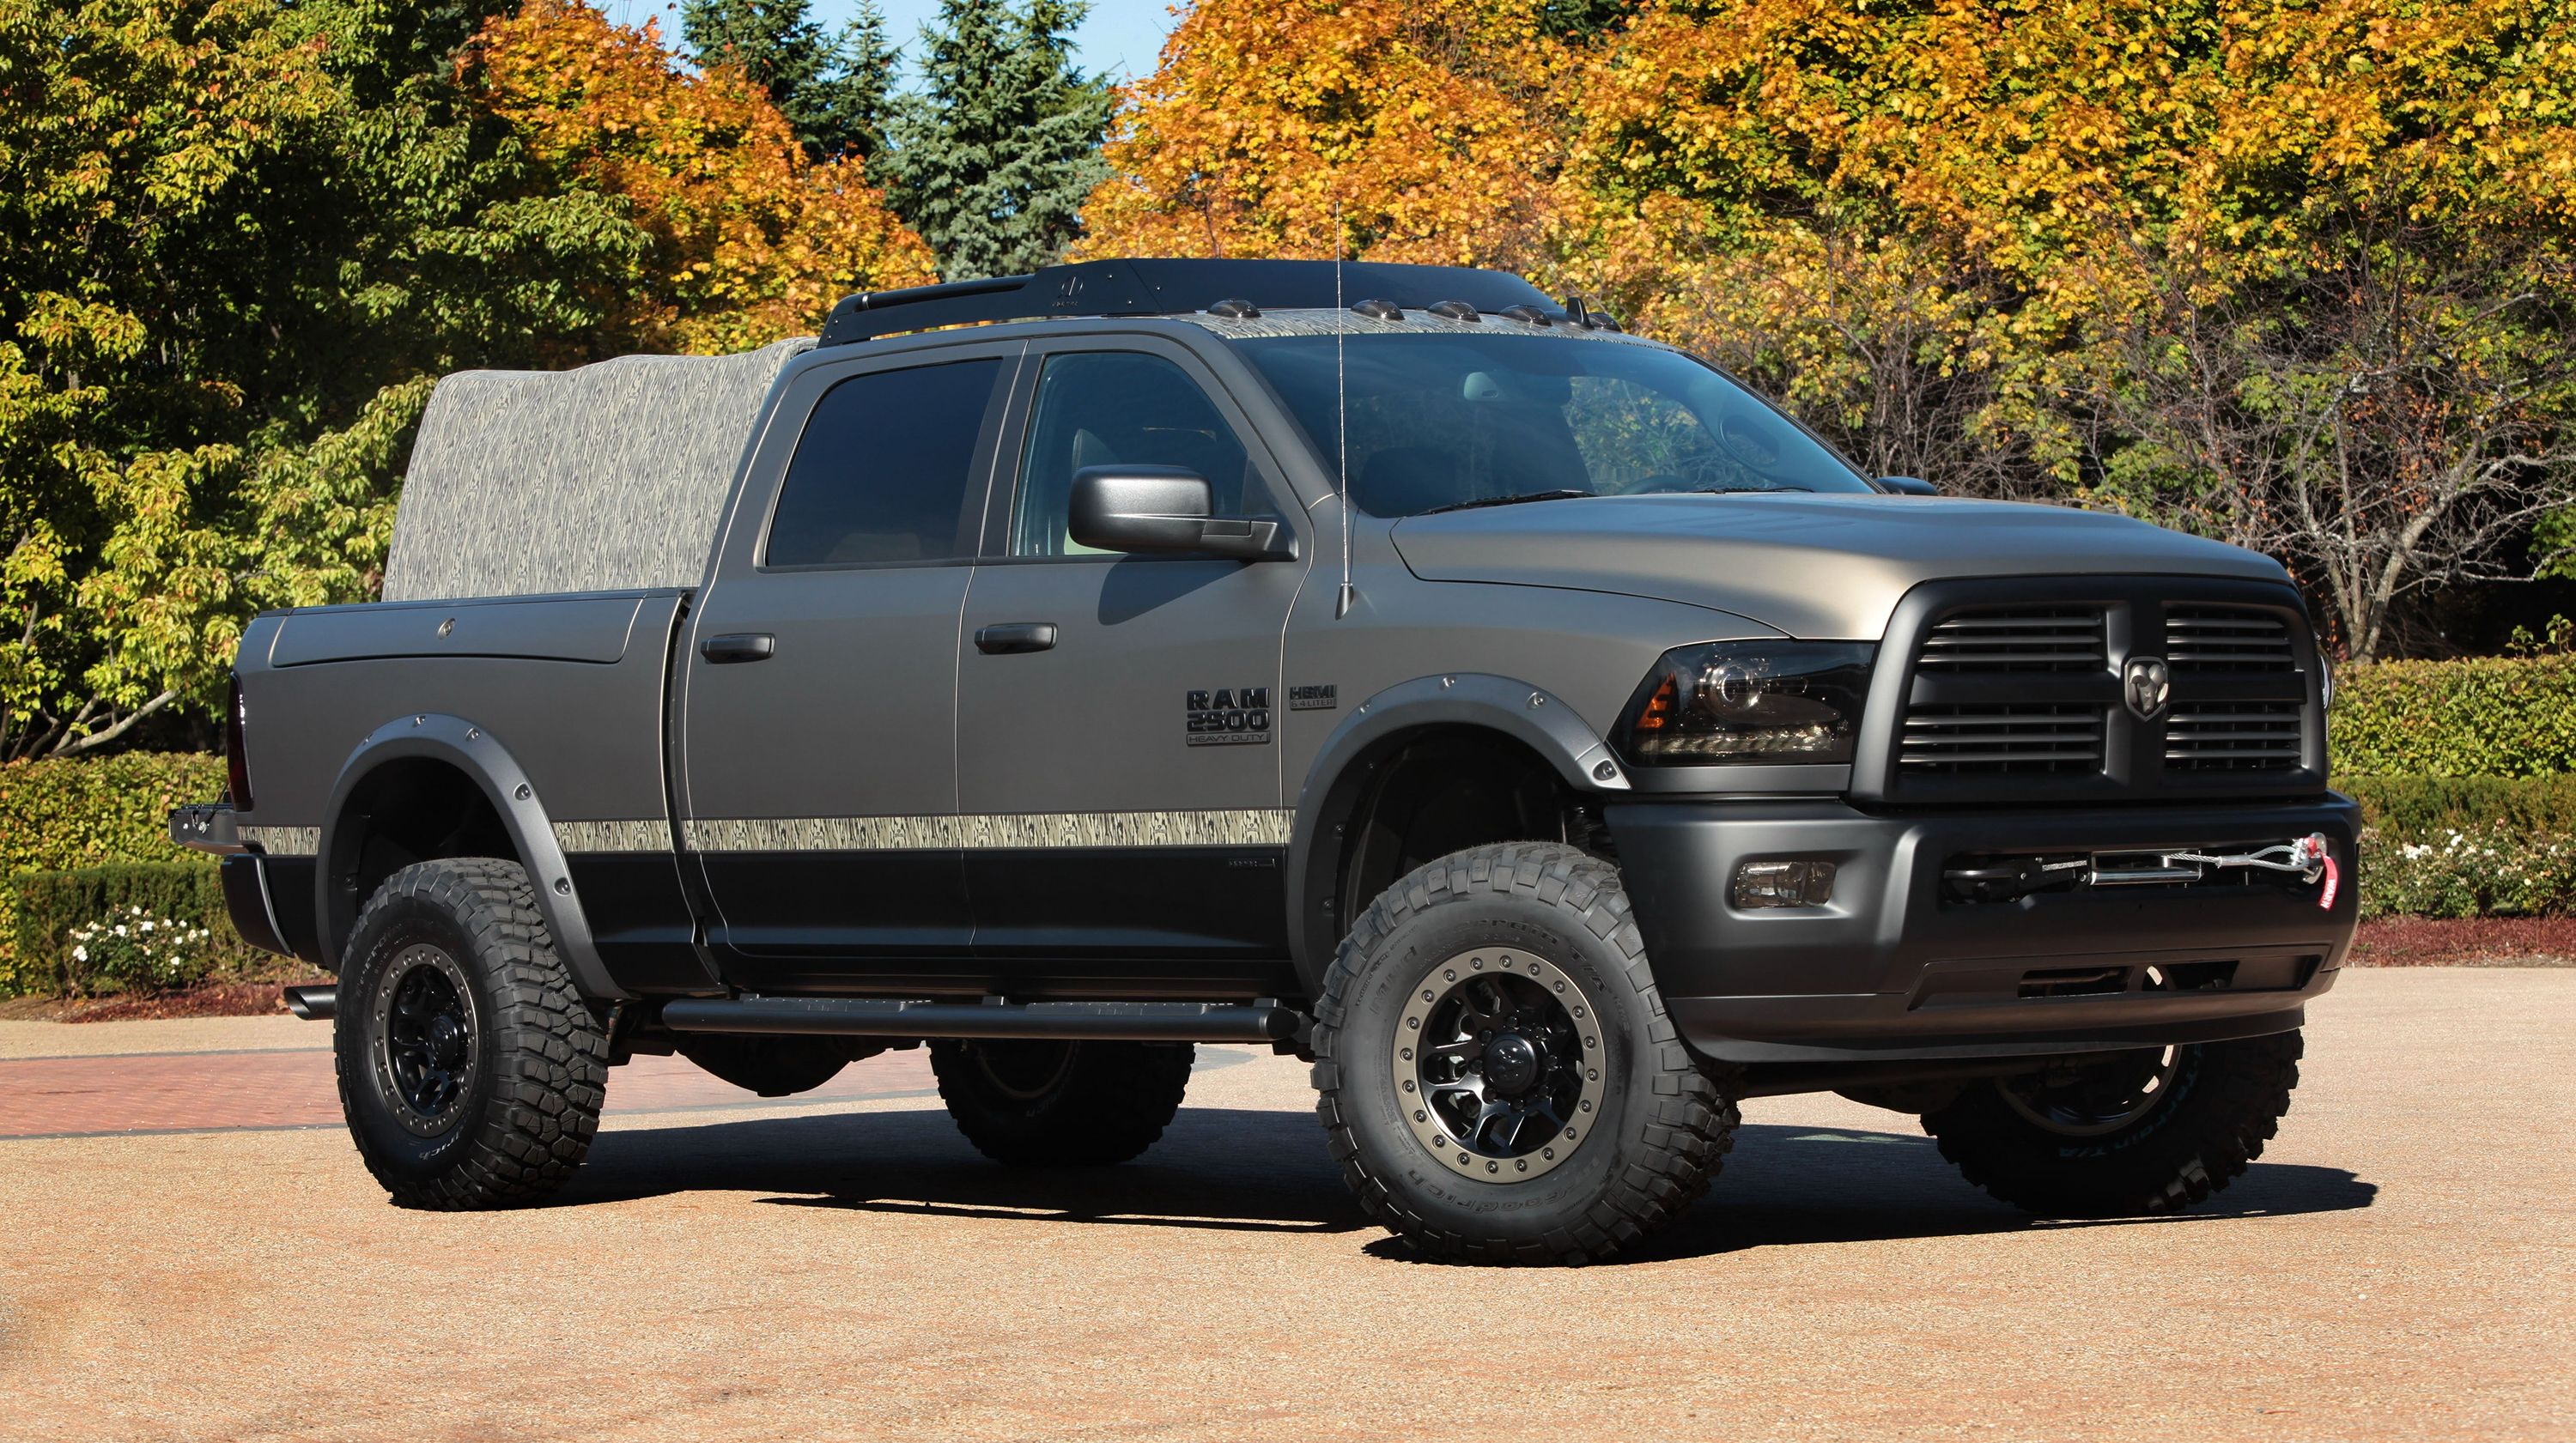  The Ram 2500 Outdoorsman will be present at the 2014 SEMA show. 